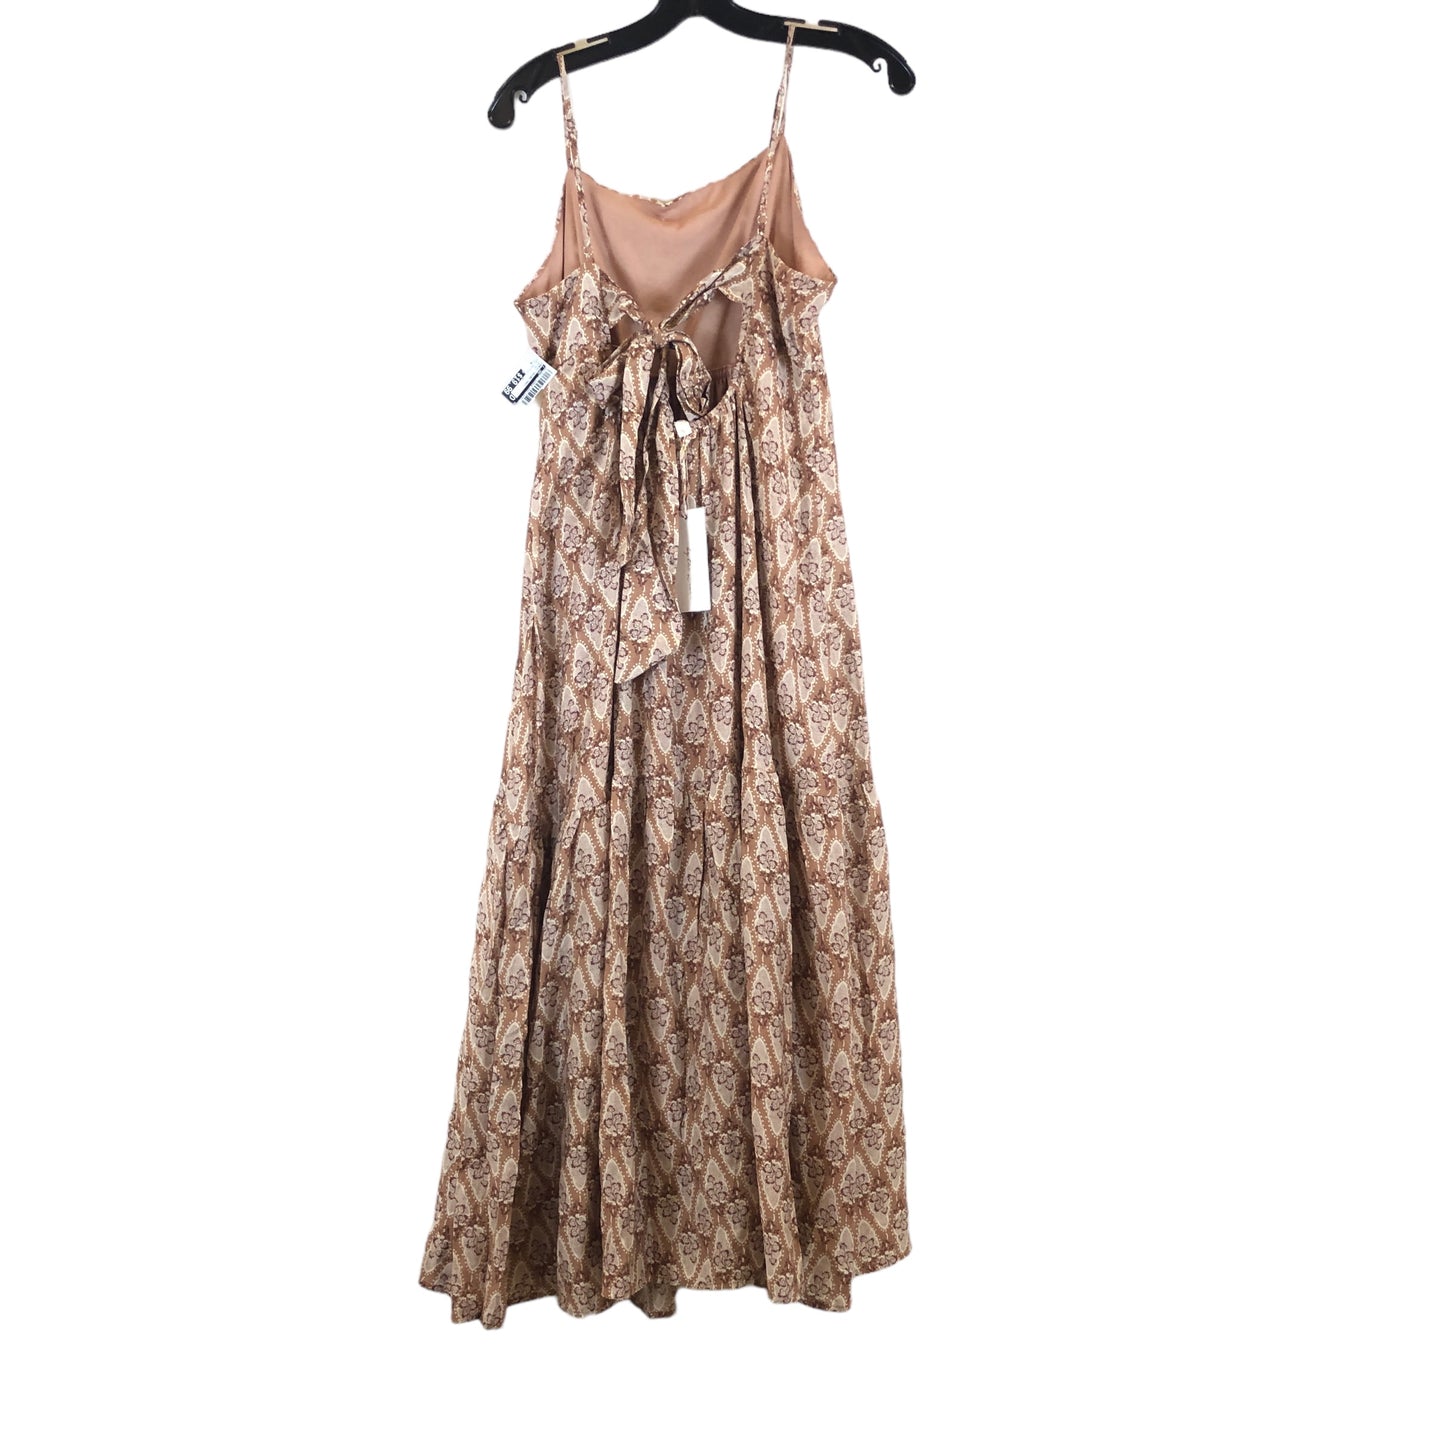 Dress Casual Maxi By by the River Size: M